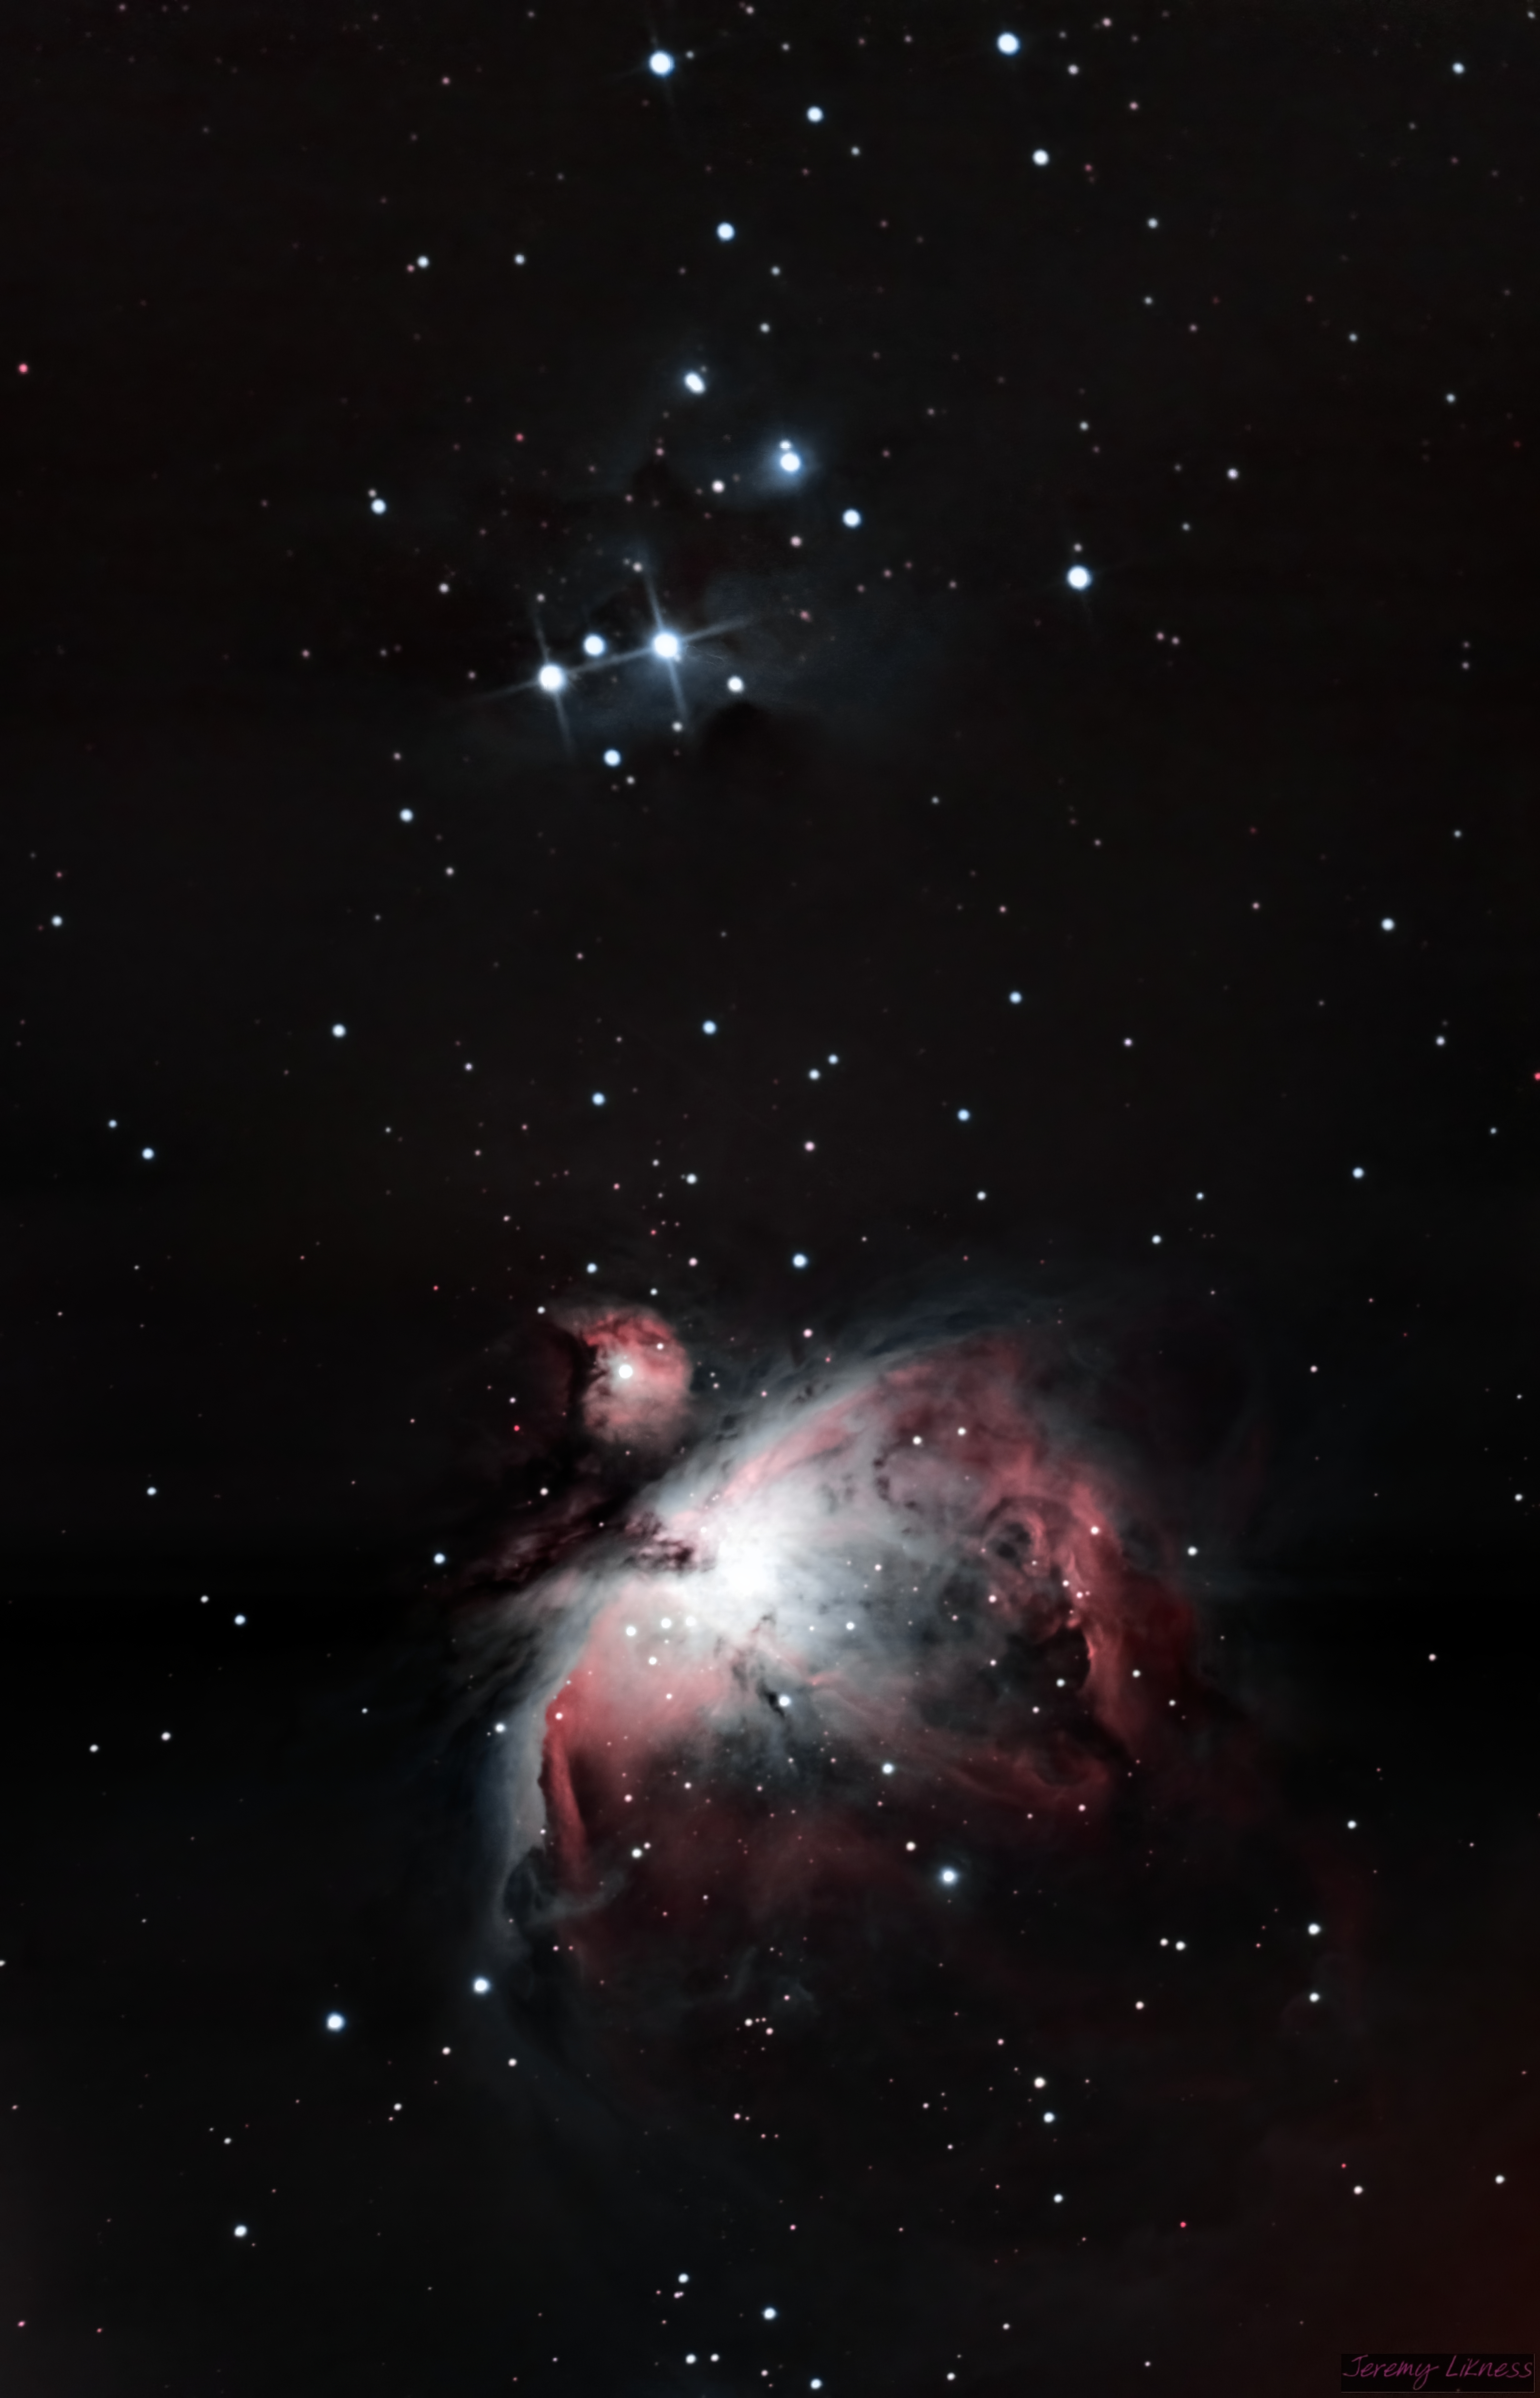 Orion's Sword: NGC1977, M42, and M43